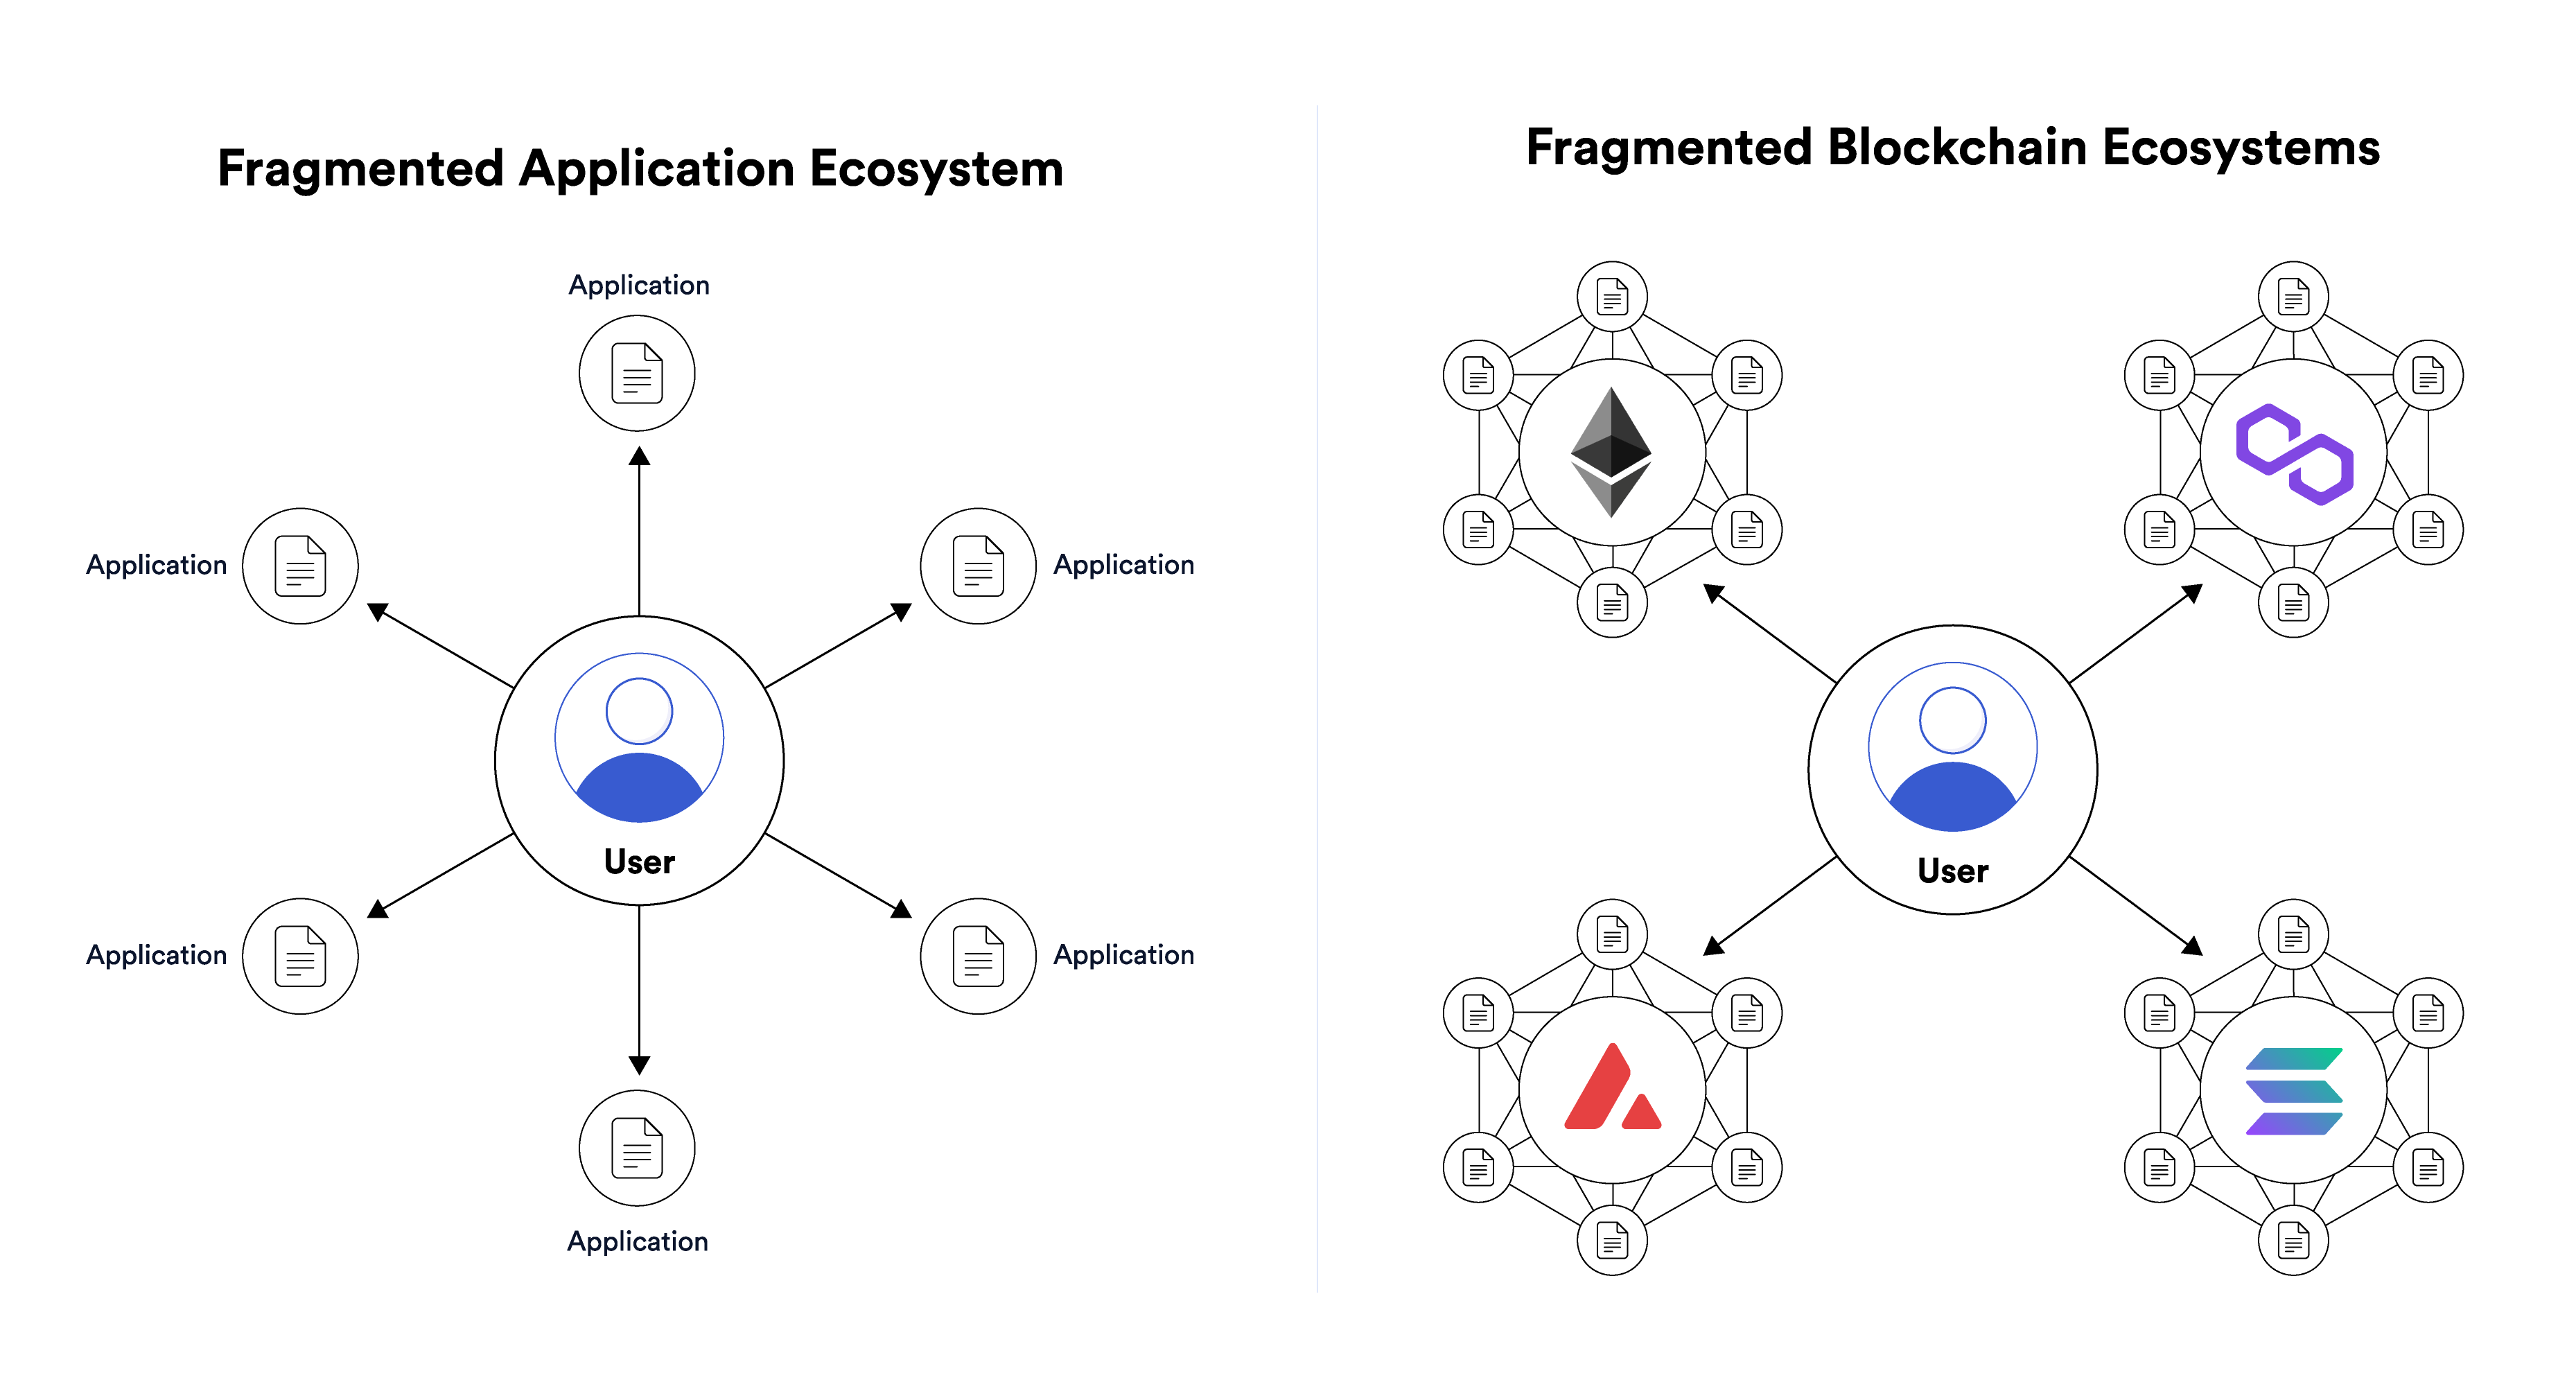 A diagram drawing a parallel between Web2’s application ecosystem and Web3 blockchains.